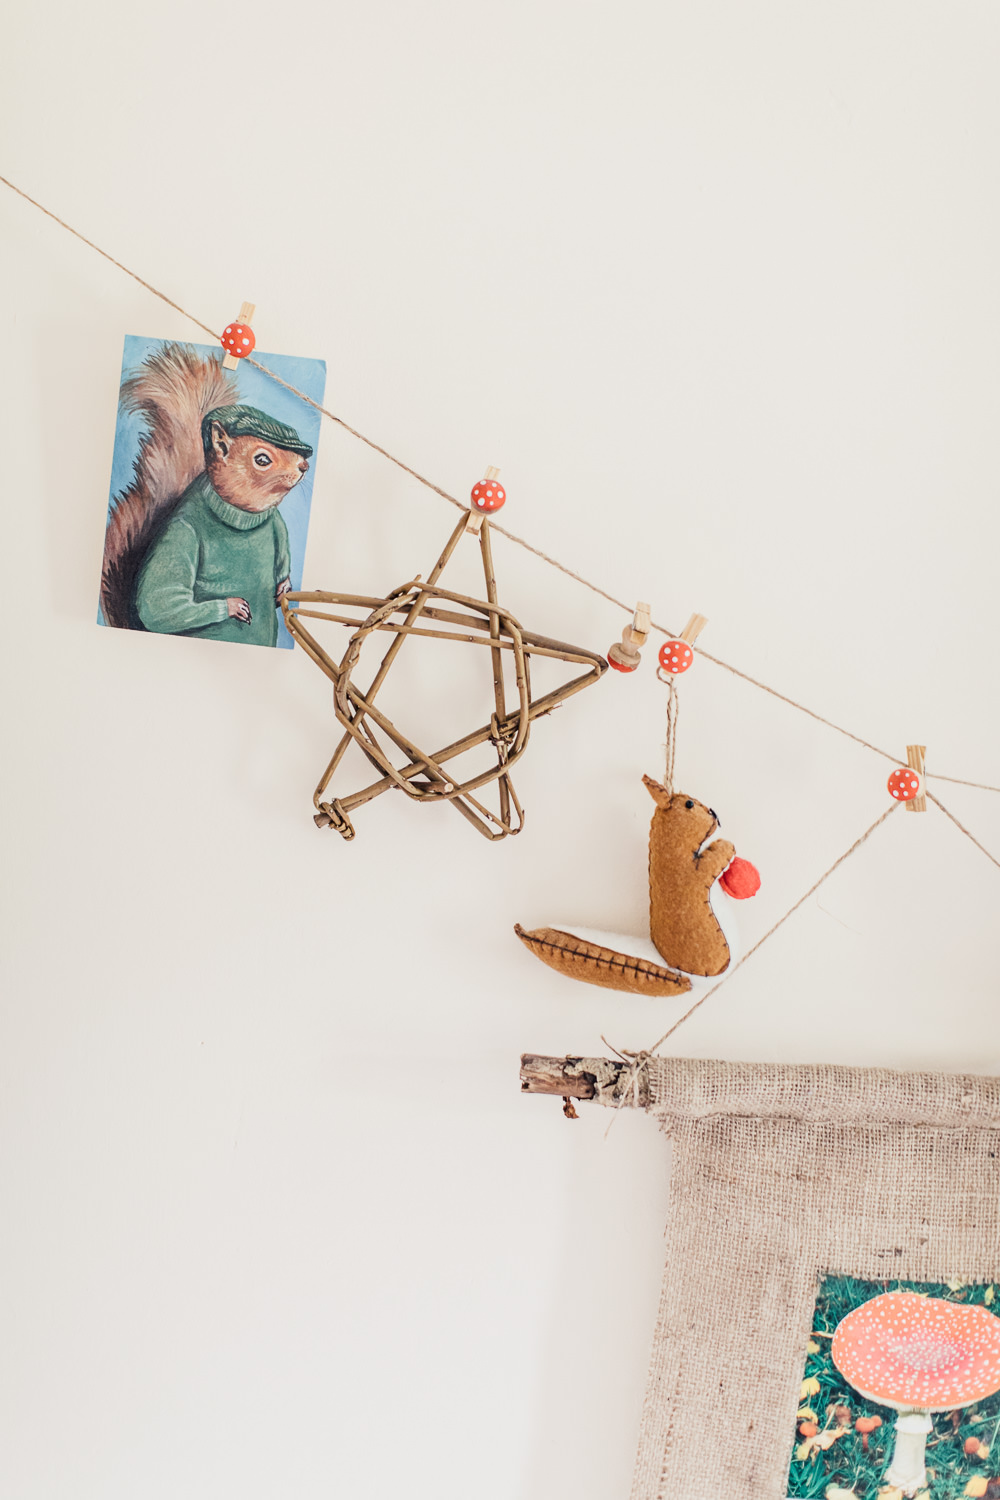 Woodland decor | Bright toys and wall decor in a woodland inspired children's bedroom in a rented property with homemade decor and details.